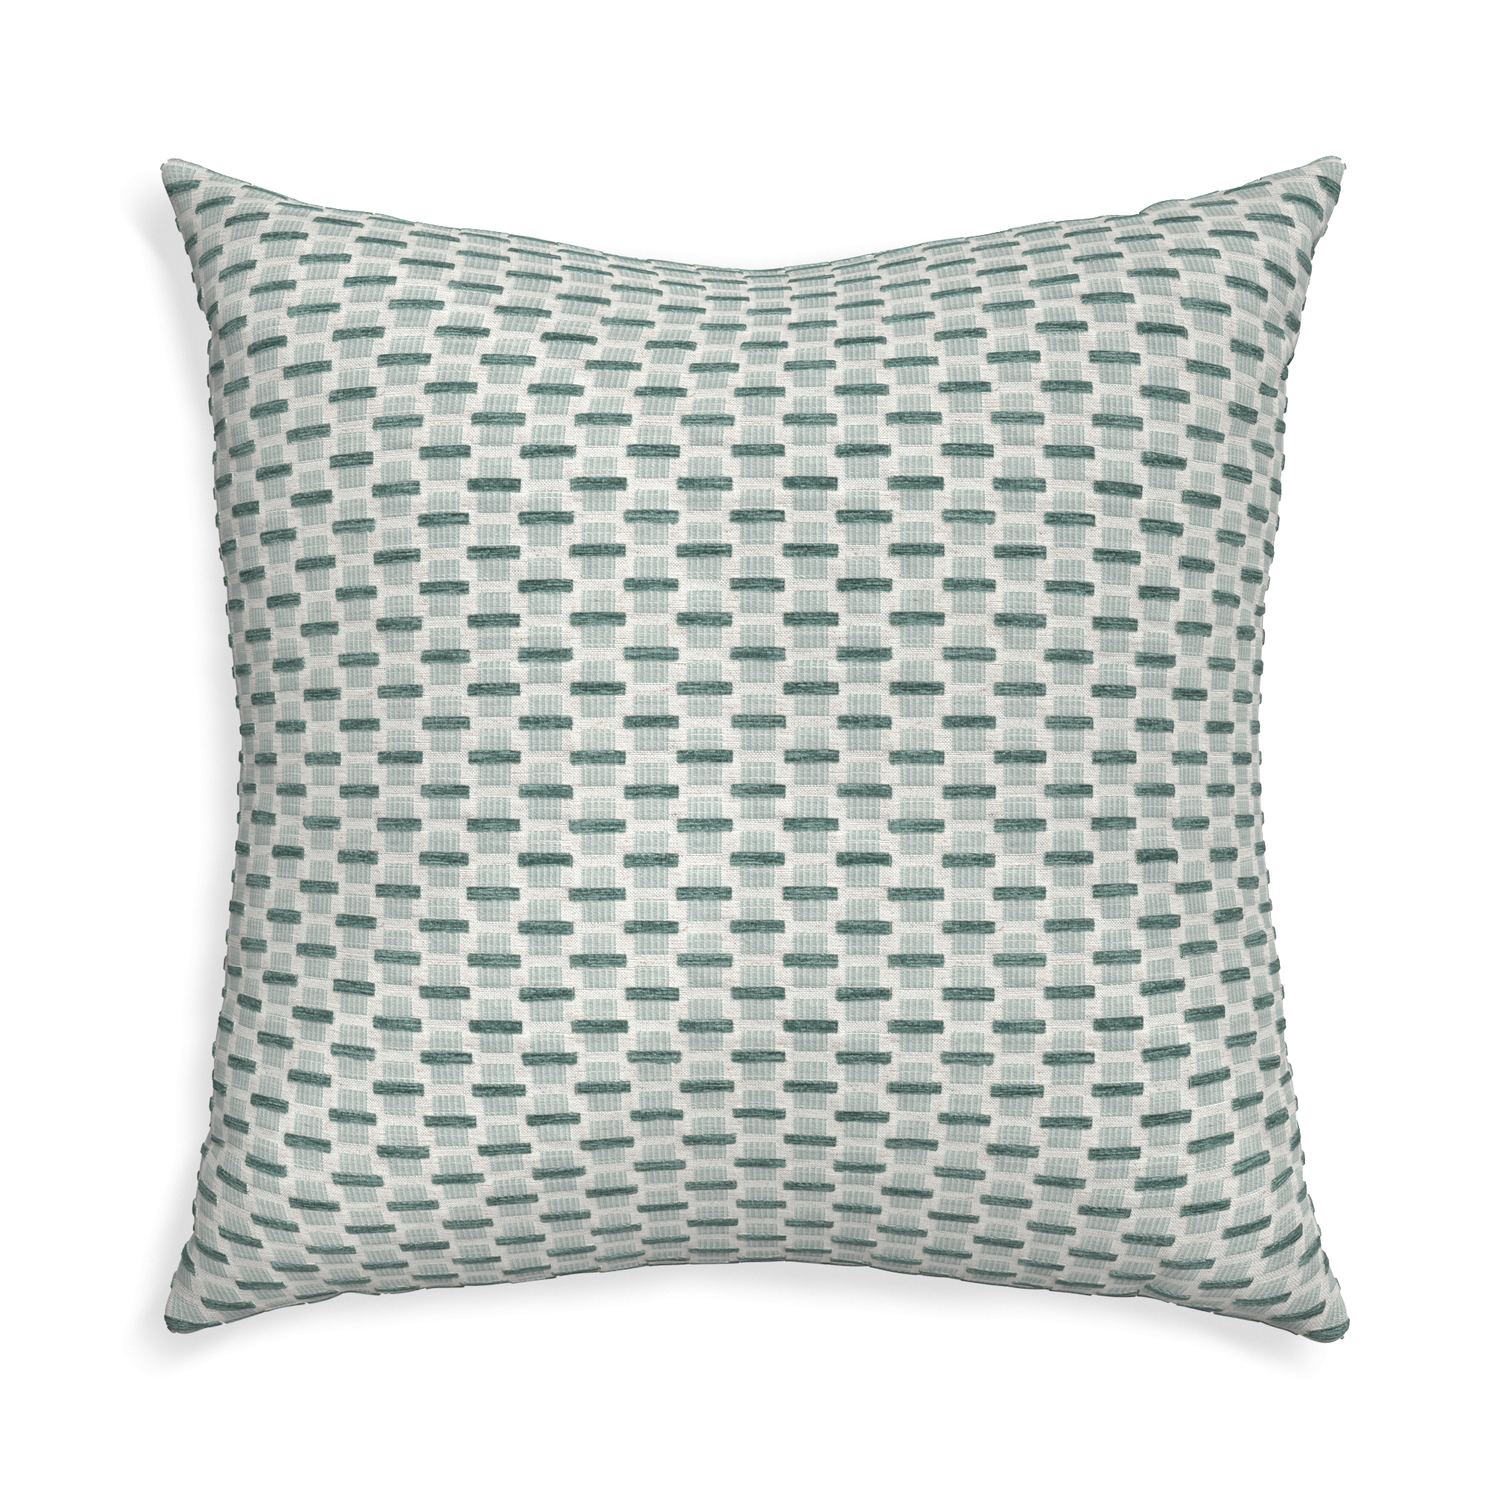 Euro-sham willow mint custom green geometric chenillepillow with none on white background